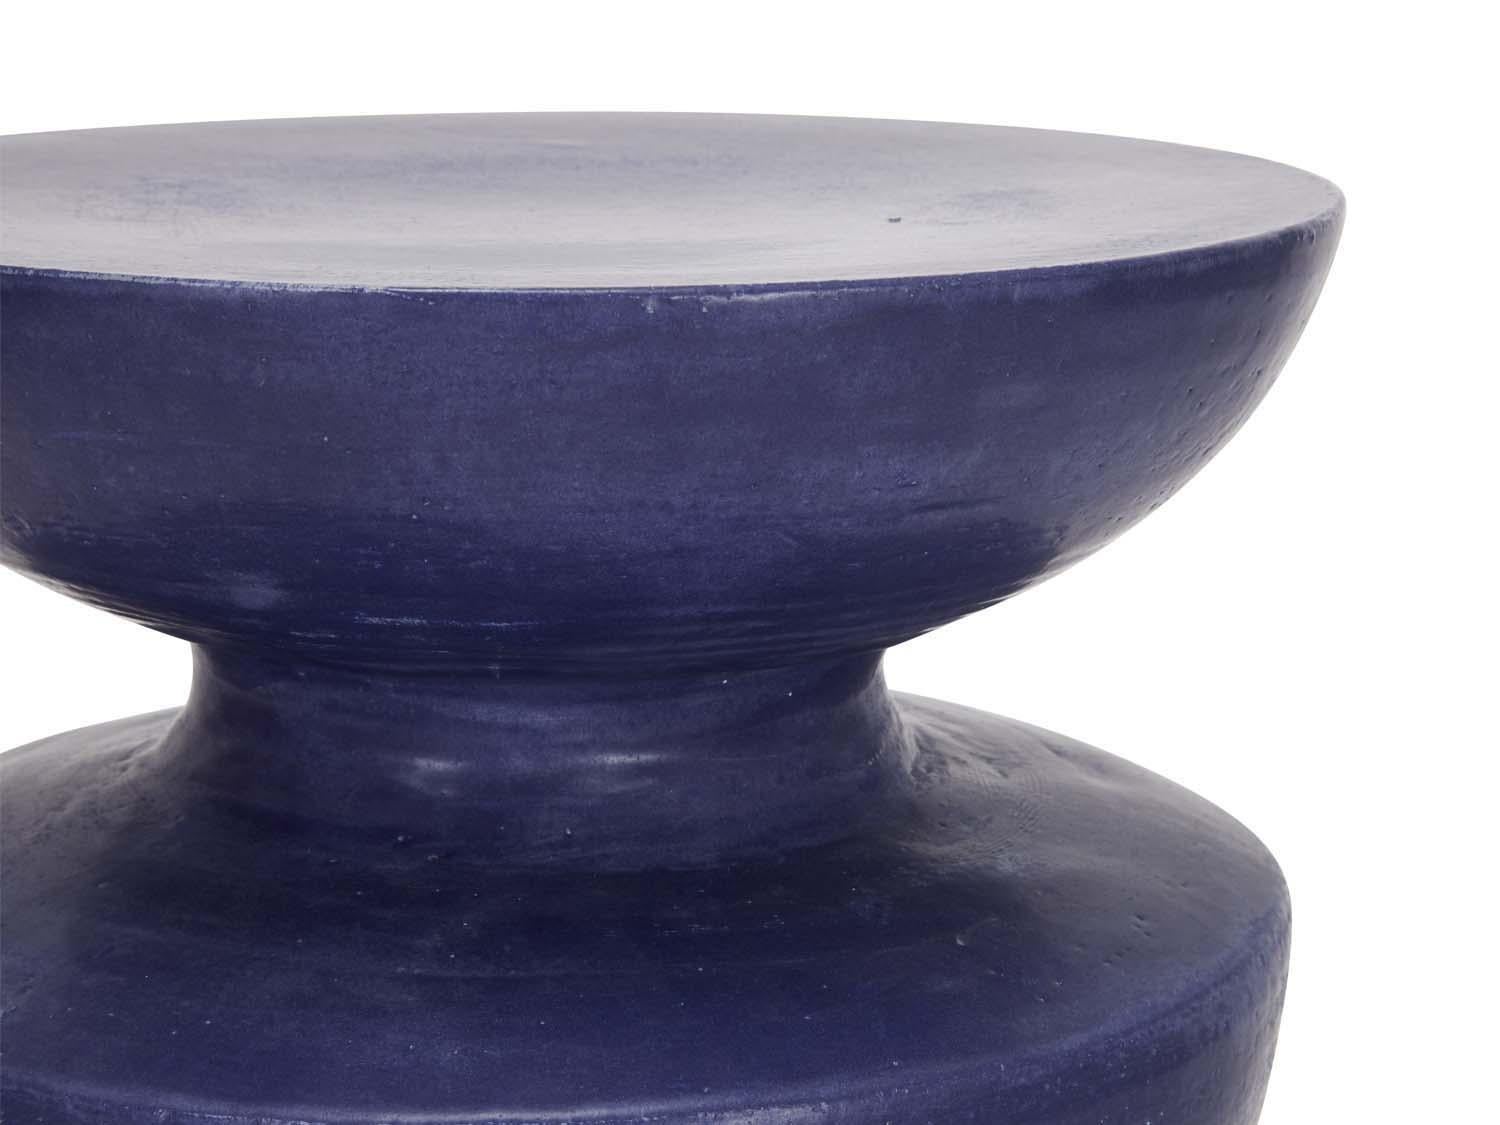 The Amphora Table is handmade studio pottery by ceramic artist by Danny Kaplan. Please note exact dimensions may vary.

Born in New York City and raised in Aix-en-Provence, France, Danny Kaplan’s passion for ceramics was shaped by early exposure